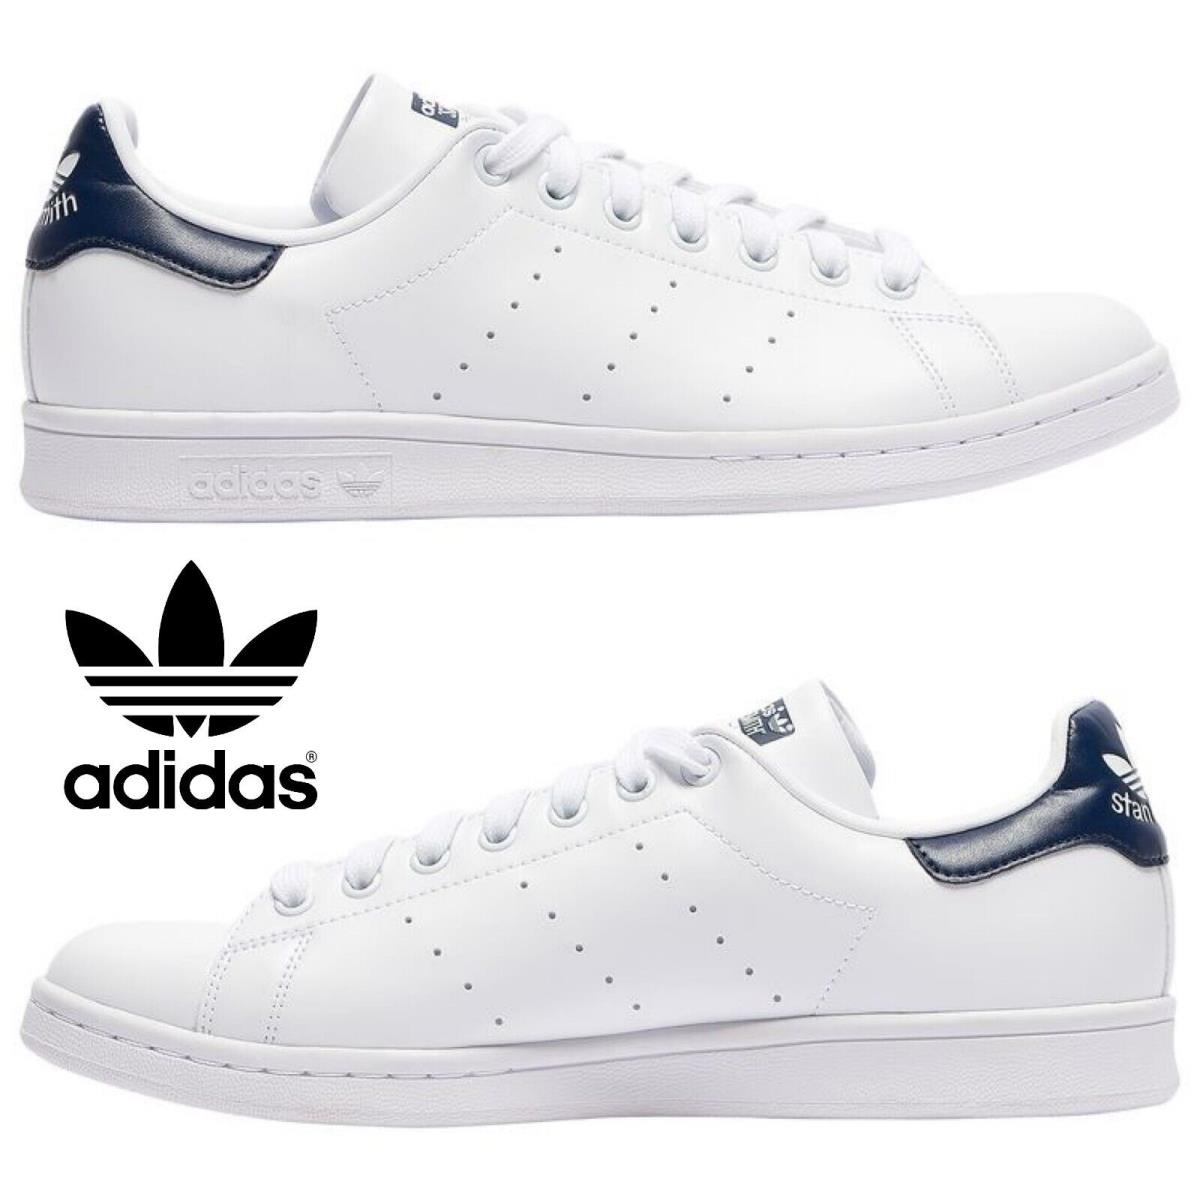 Adidas Originals Stan Smith Men`s Sneakers Comfort Sport Casual Shoes Navy White